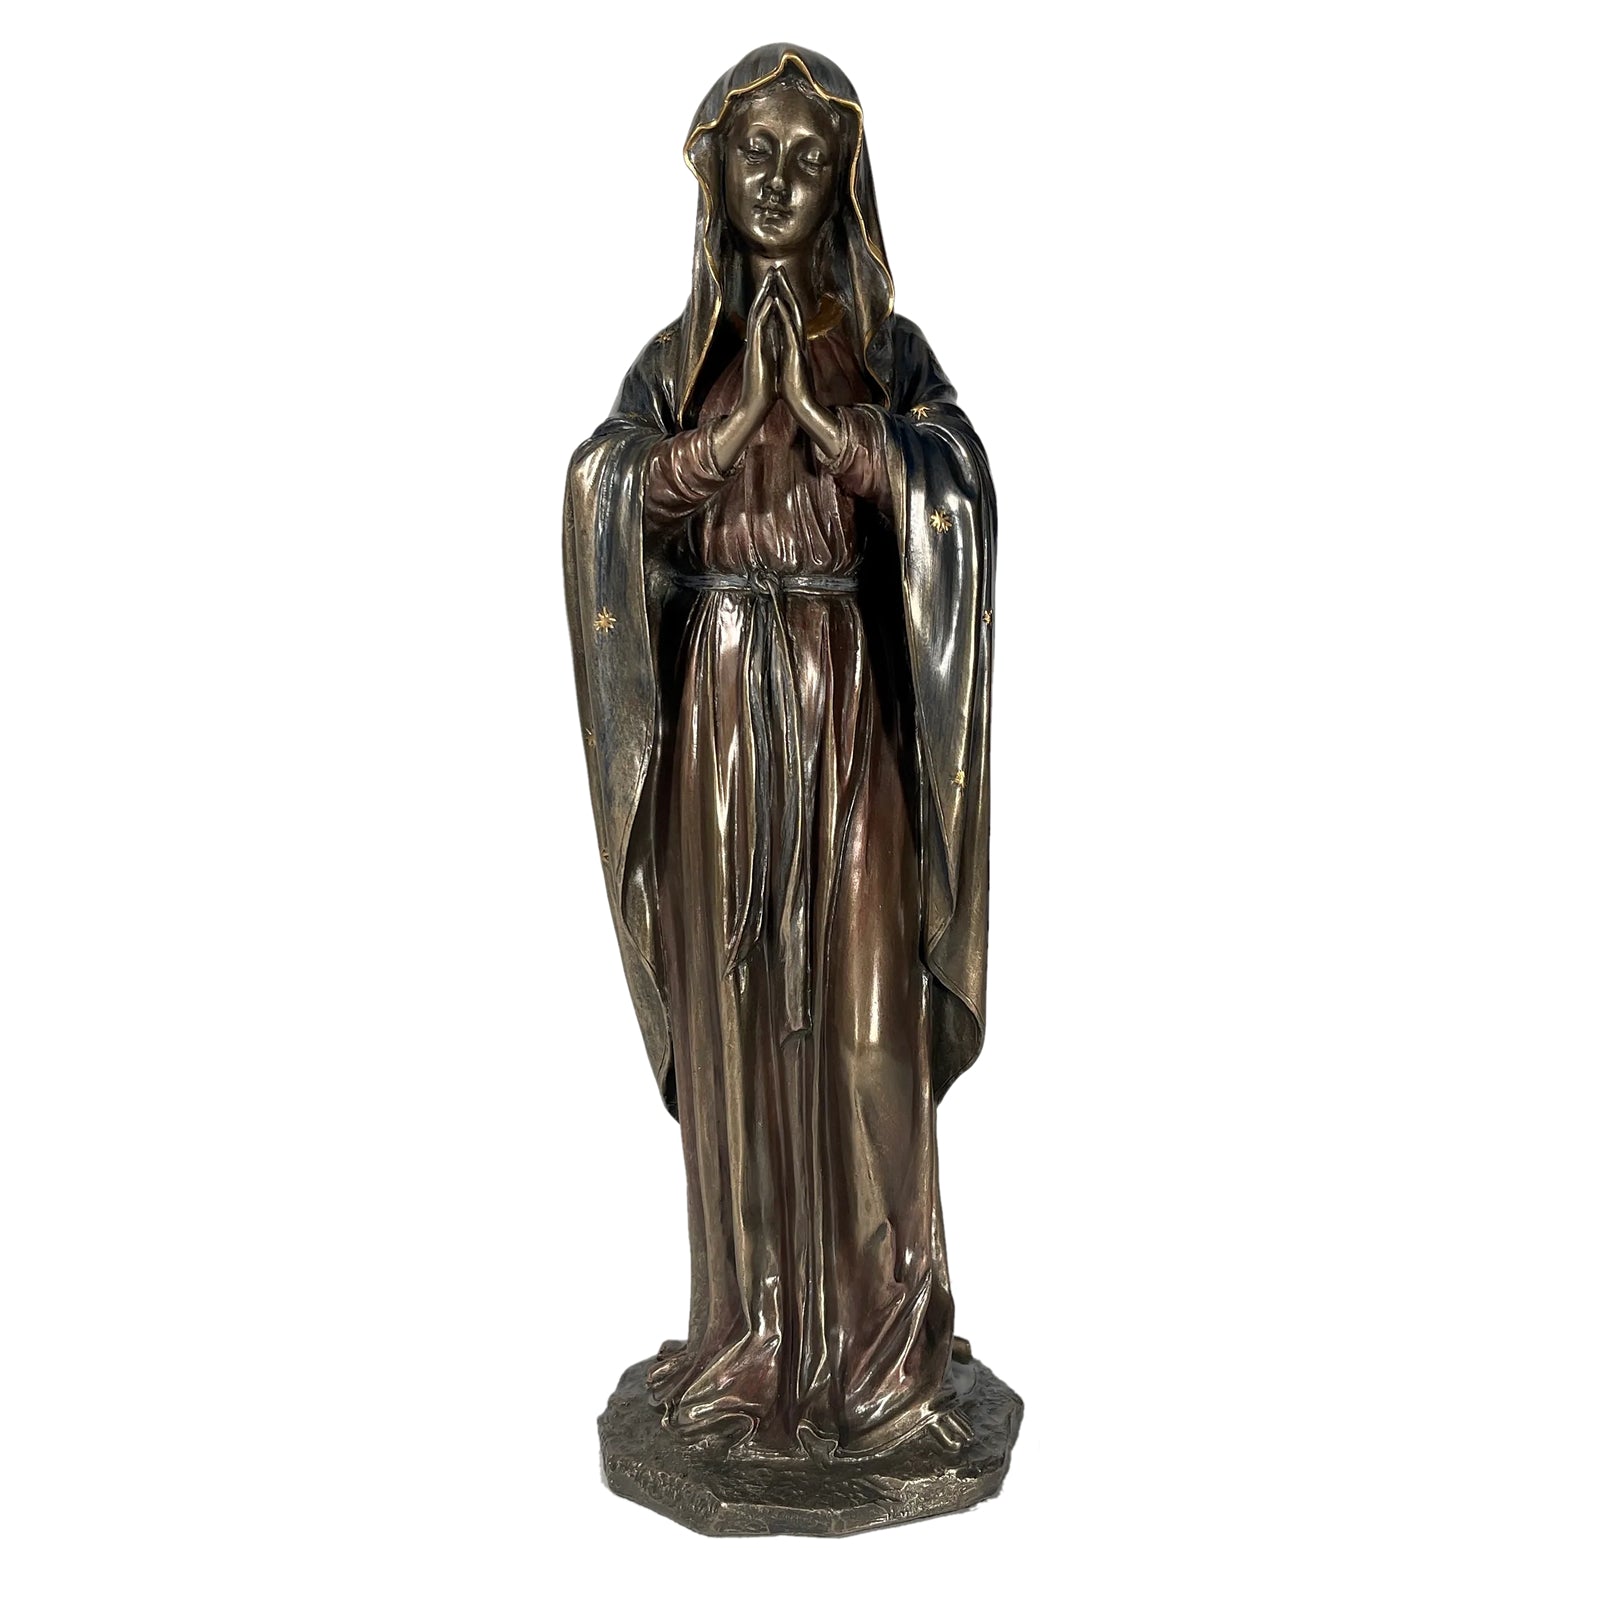 Blessed Virgin Mary Statue